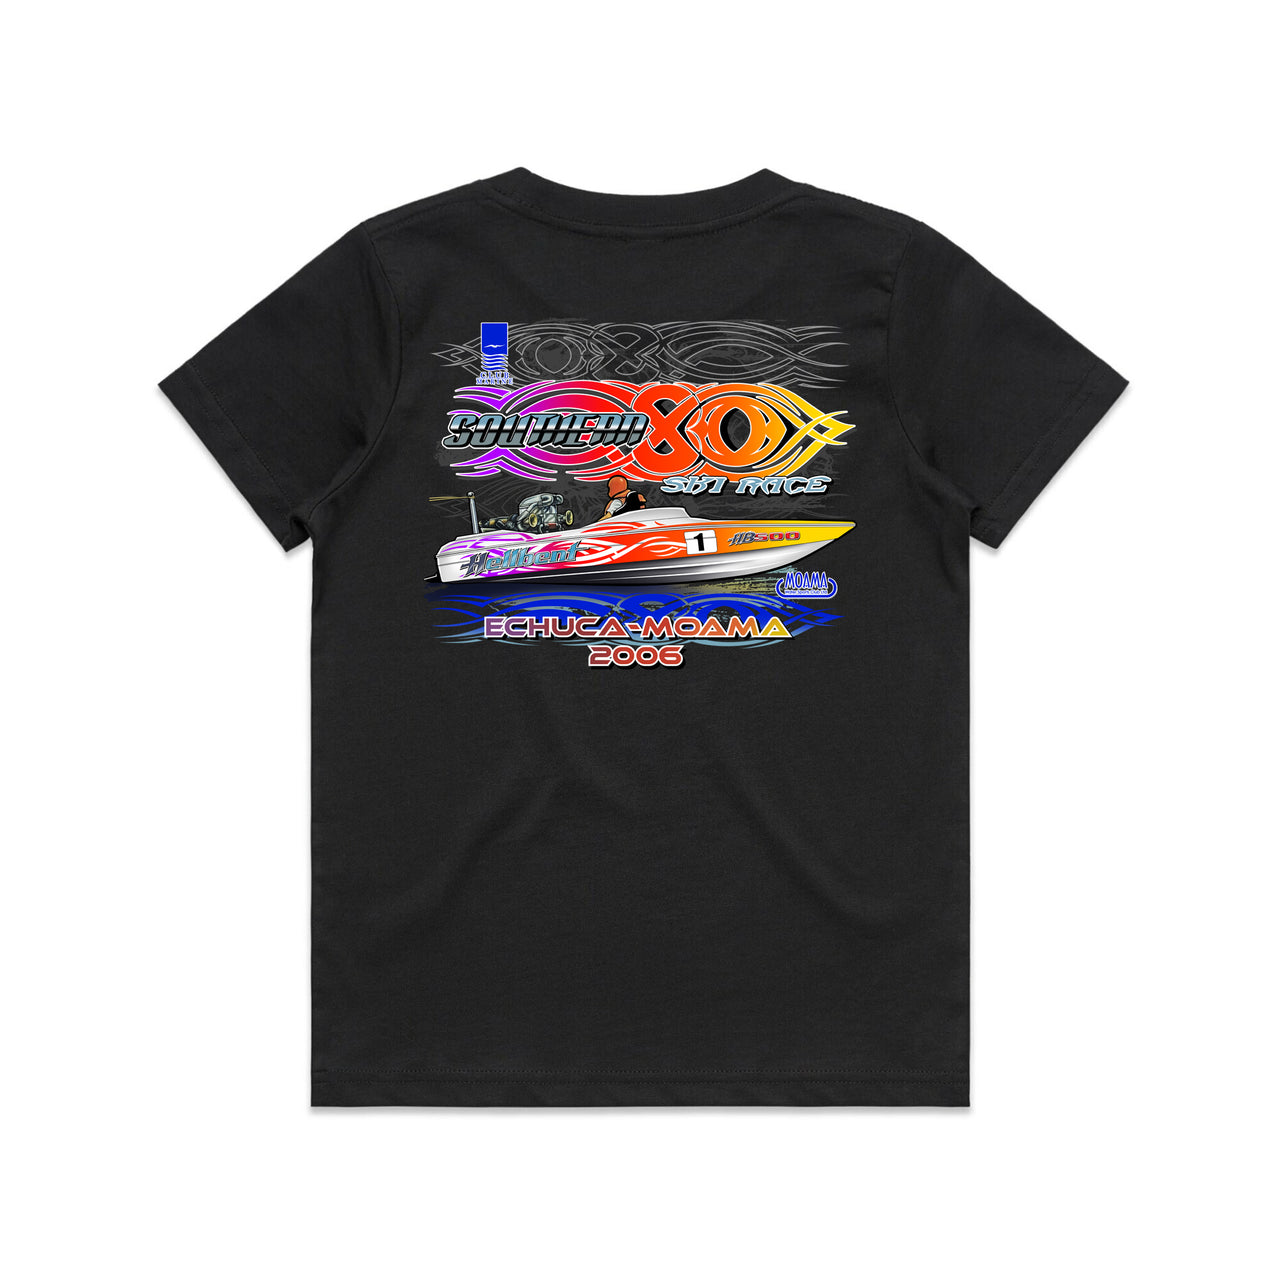 S80 2006 Hellbent Event Youth/Kids Tee